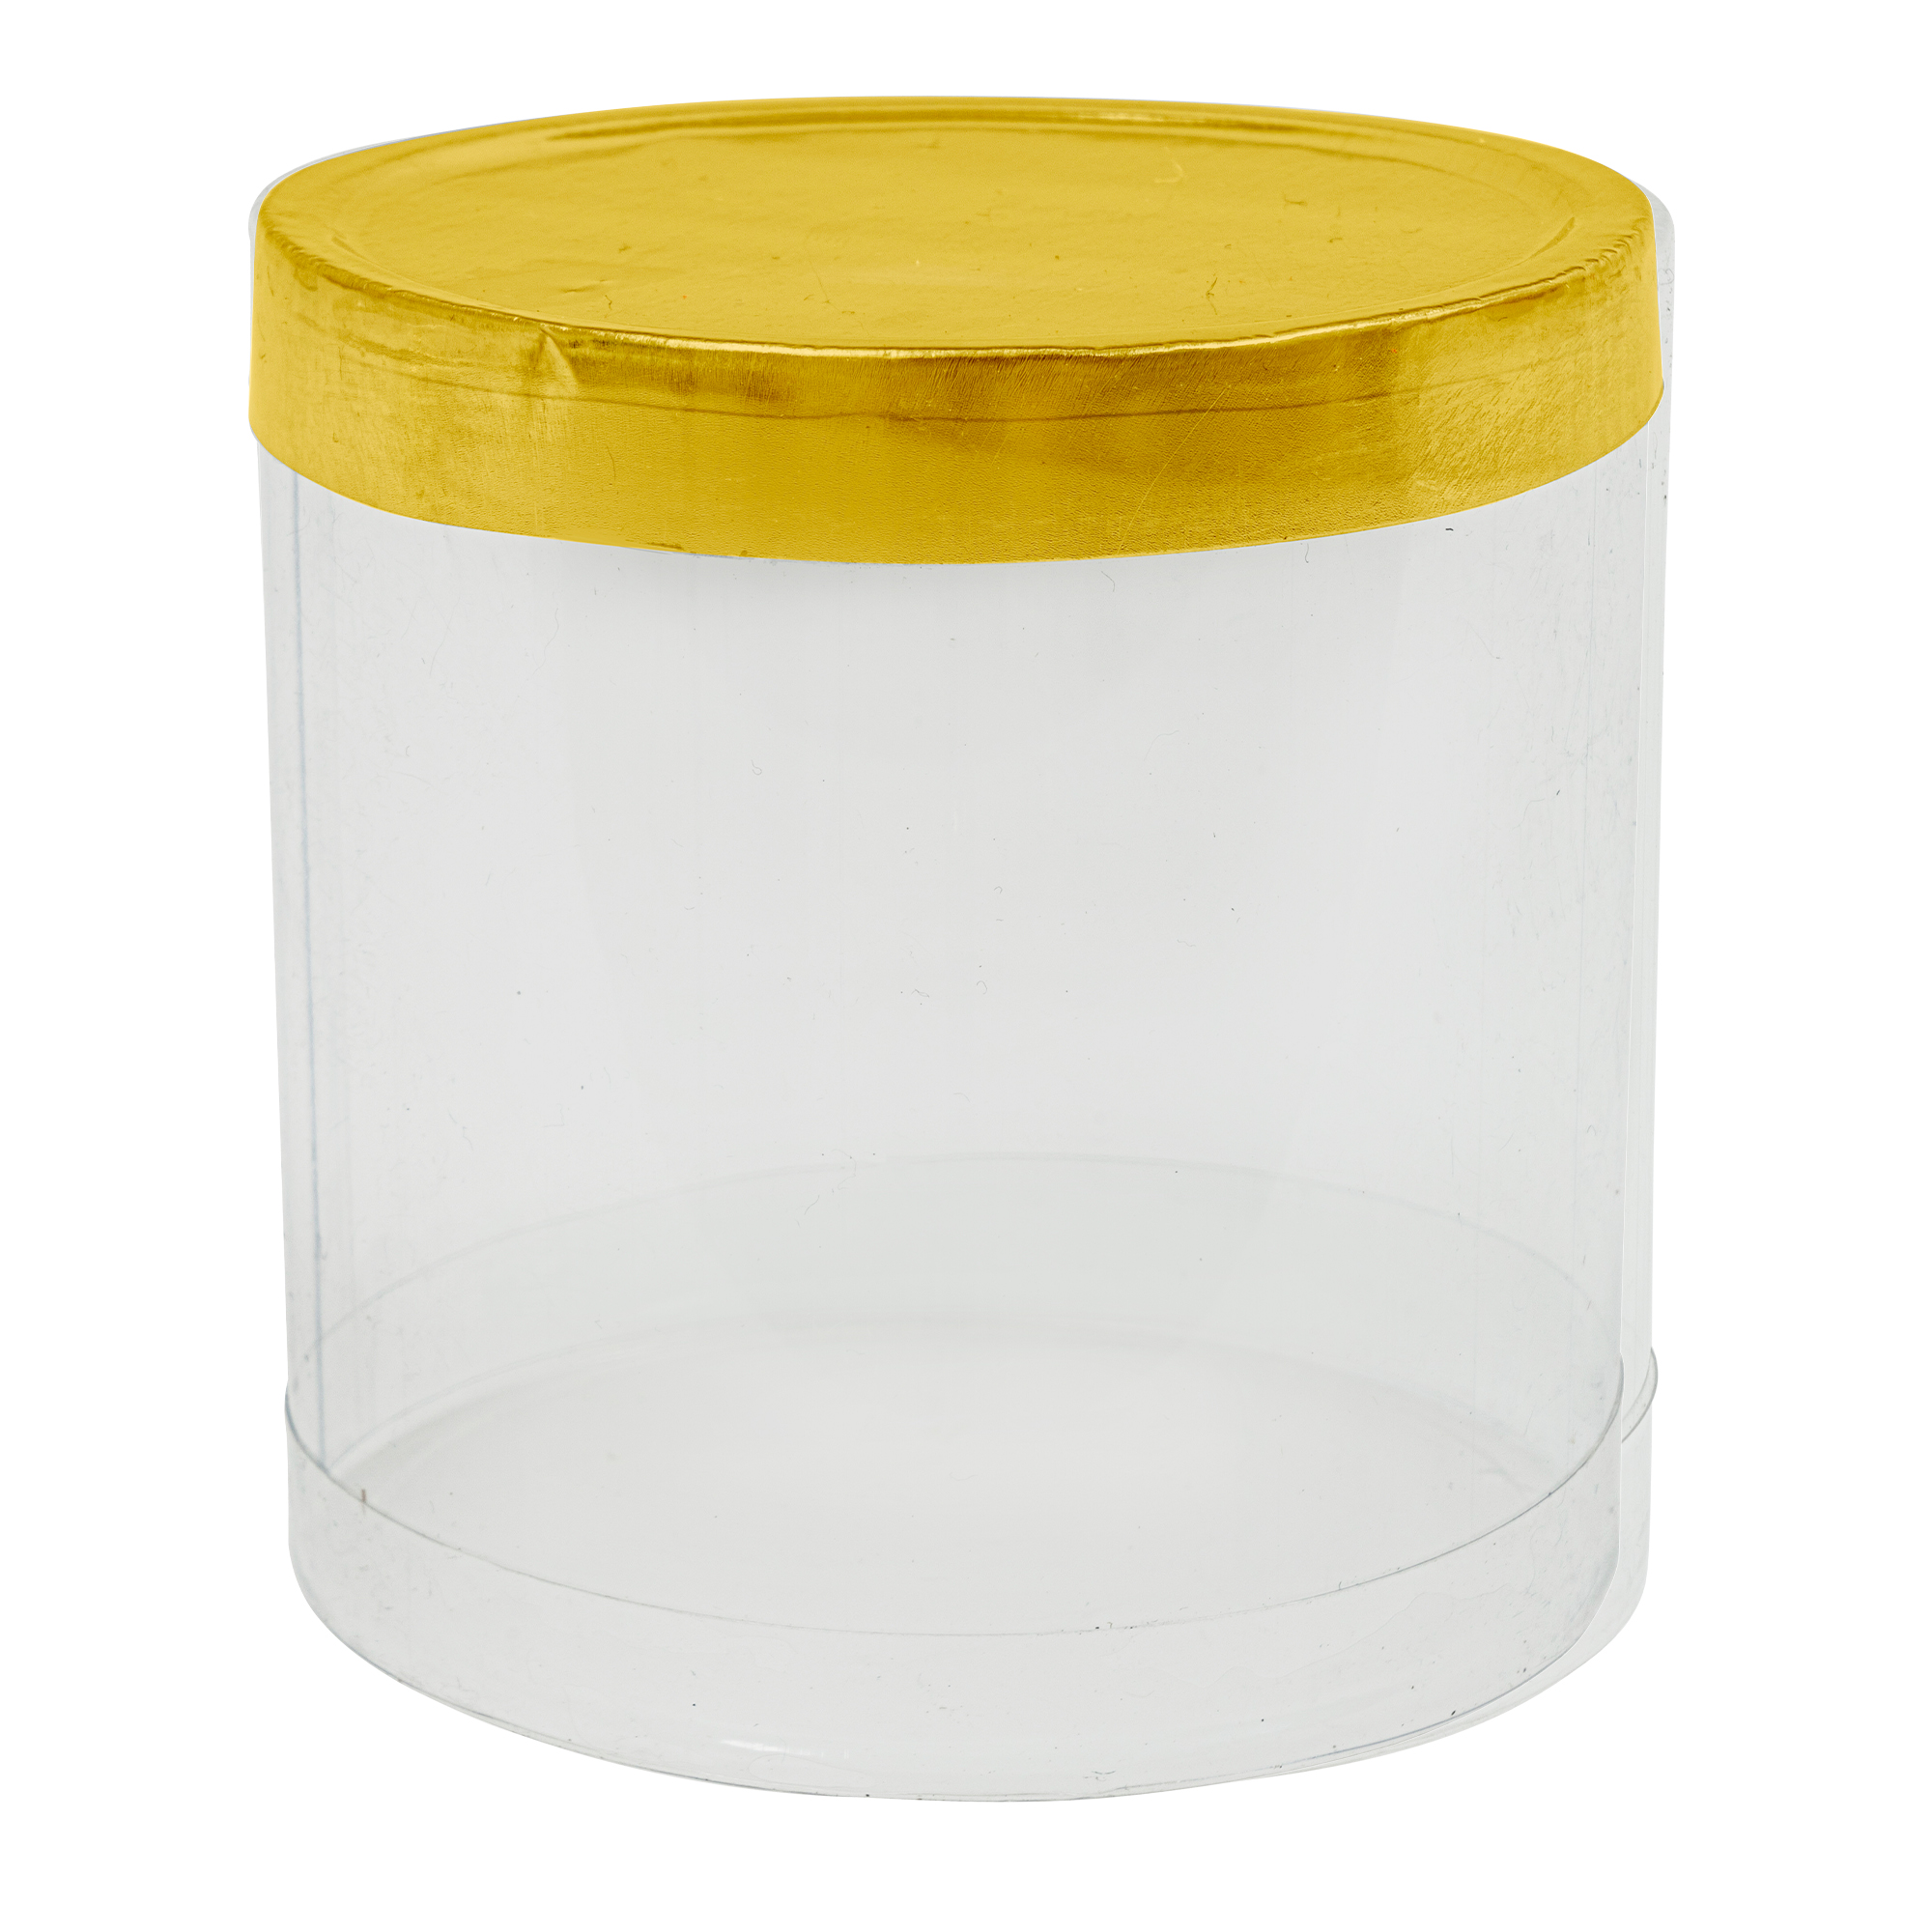 Cylinder PVC Container 2" 12pc/pack - Gold